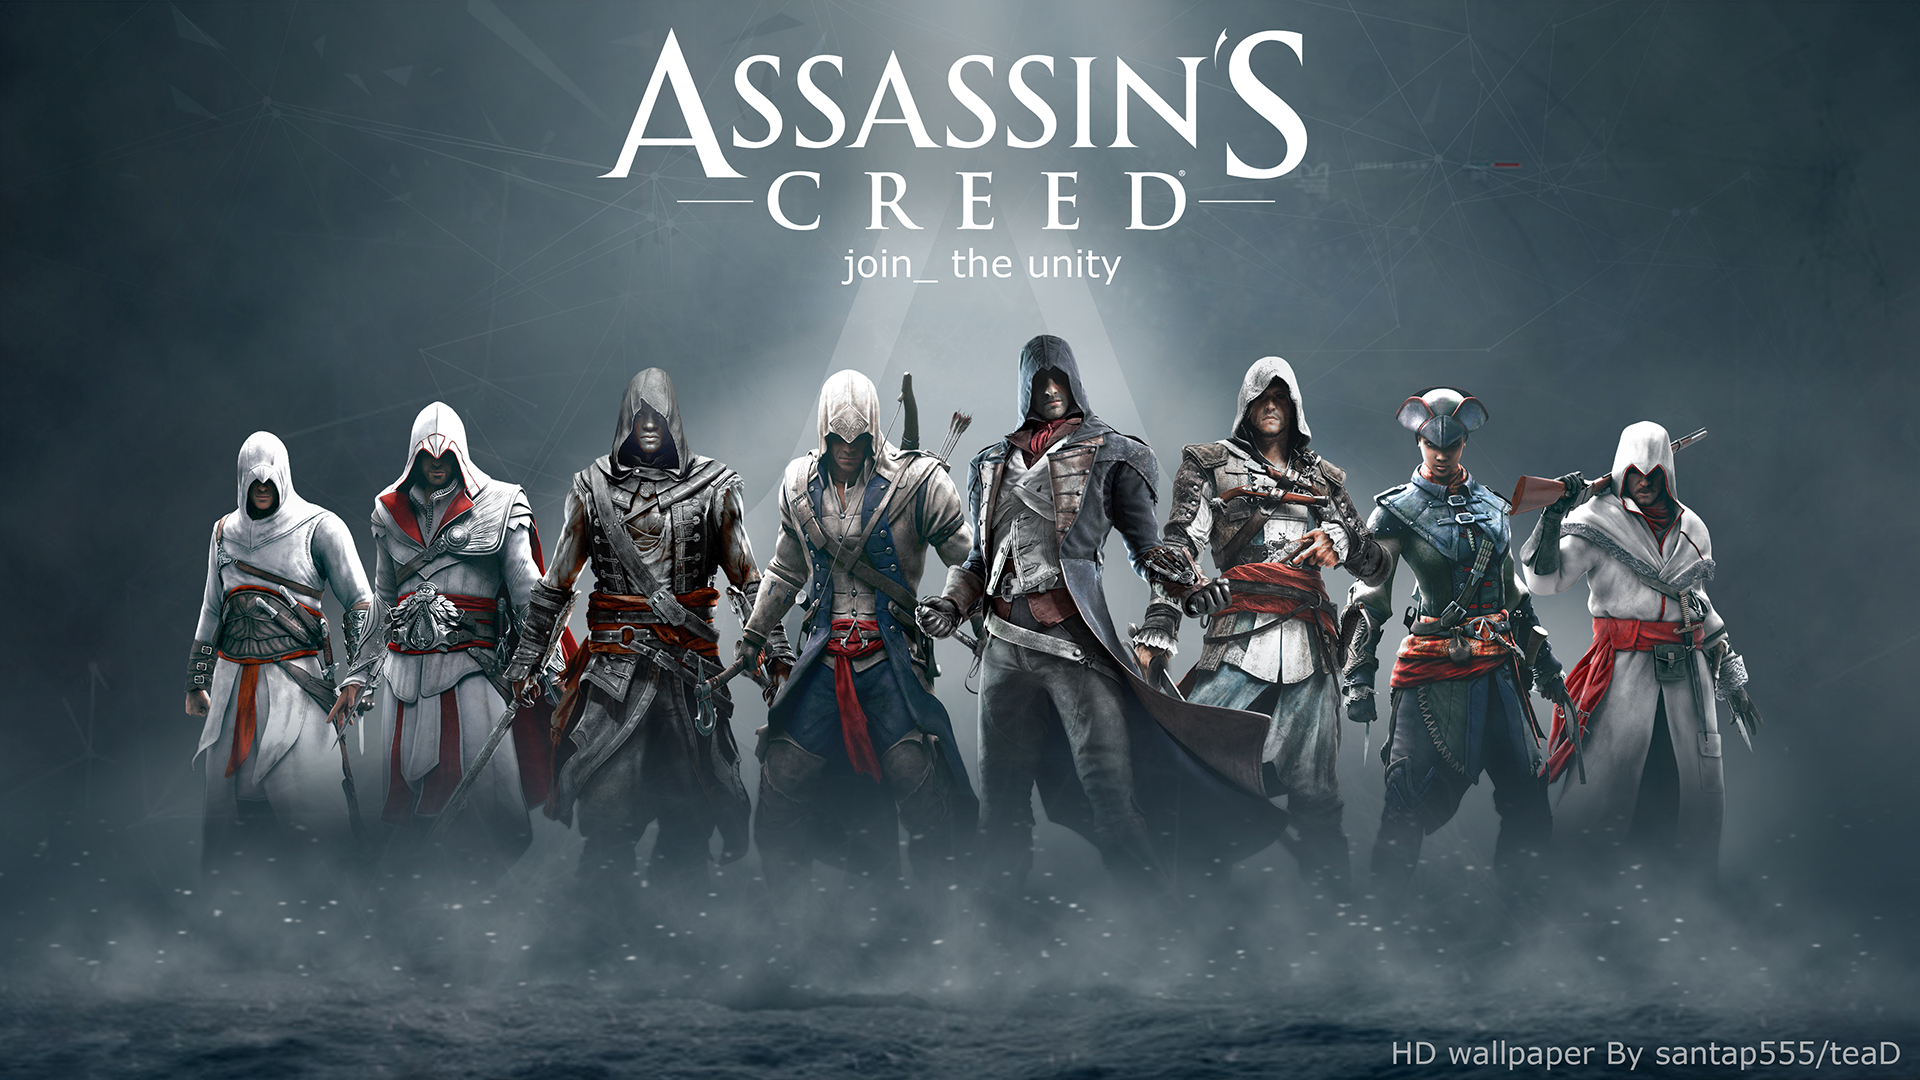 Assassins Creed HD wallpaper by teaD by santap555